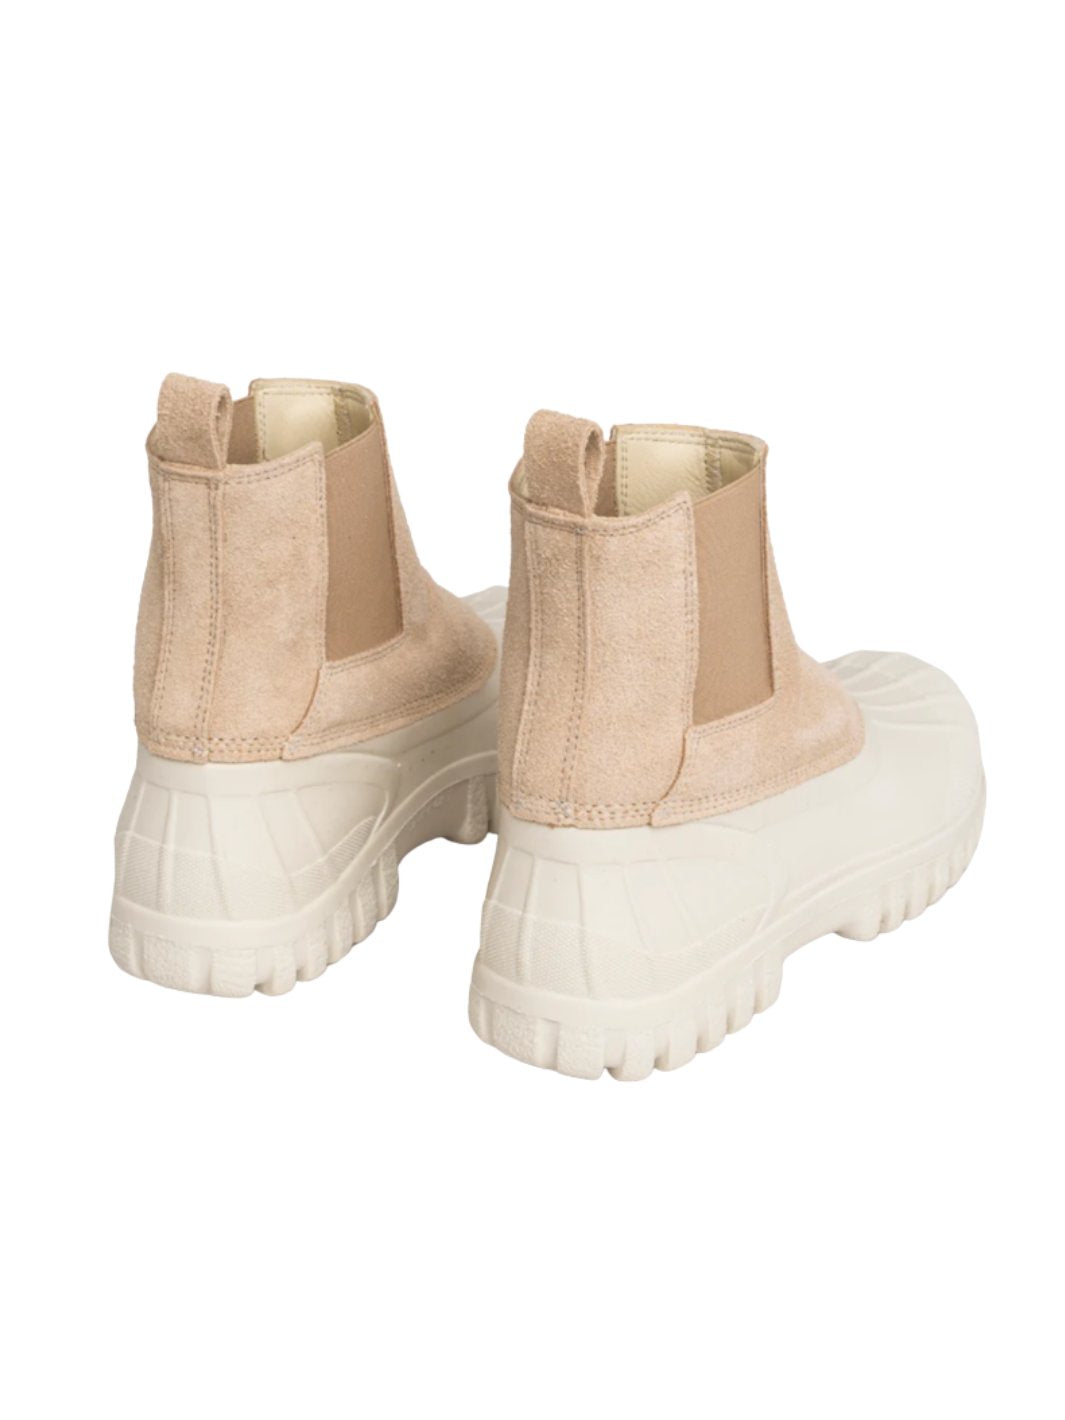 Diemme Shoes Boots | Balbi Sand Suede Shearling Sand